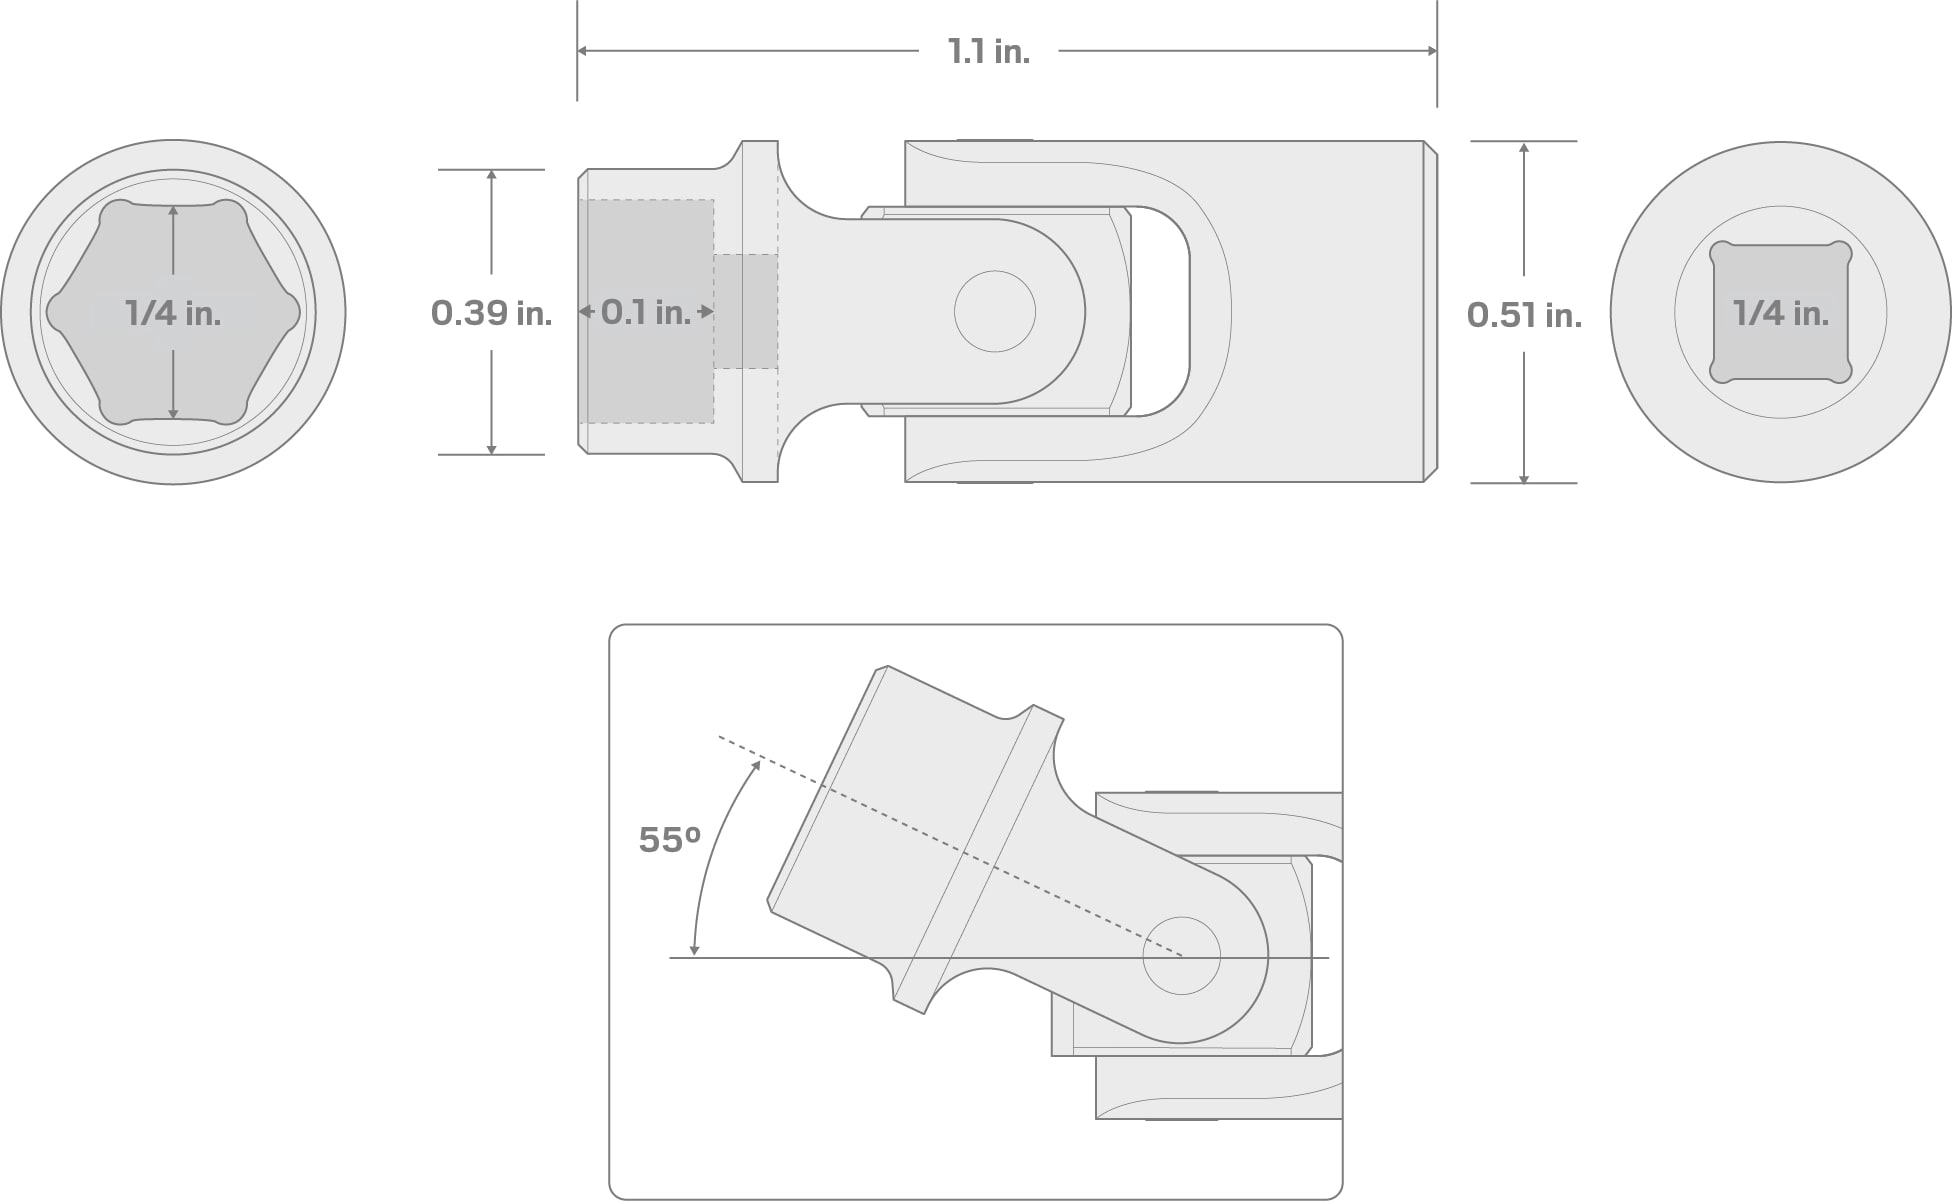 Specs for 1/4 Inch Drive x 1/4 Inch Universal Joint Socket